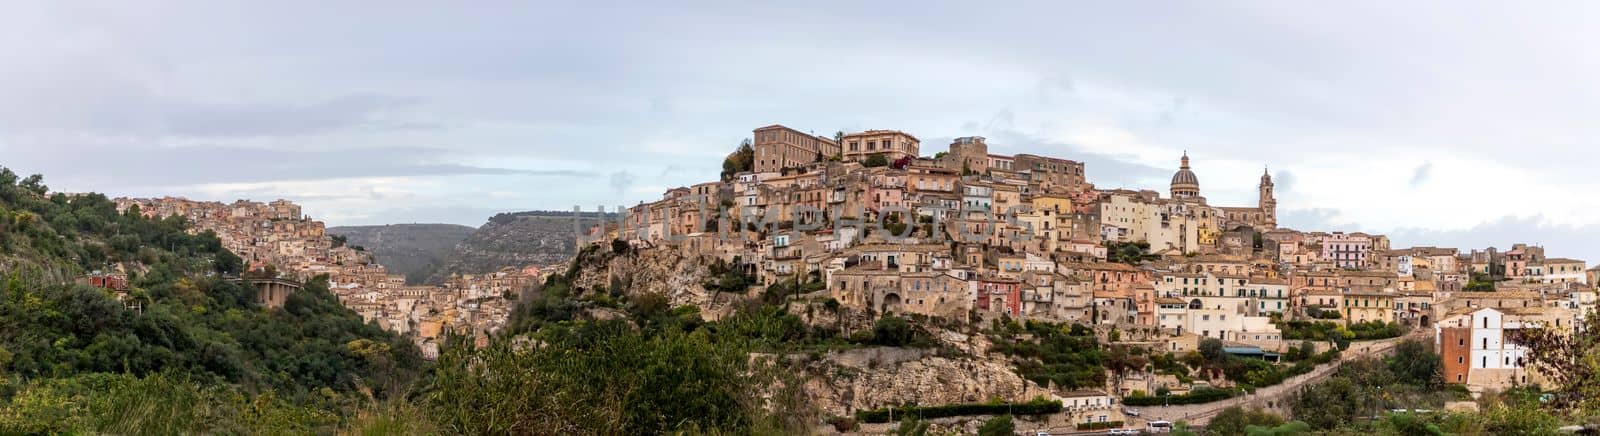 Panoramic view of Ragusa Ibla, home to a wide array of Baroque architecture and scenic lower district of the city of Ragusa, Italy by EdVal